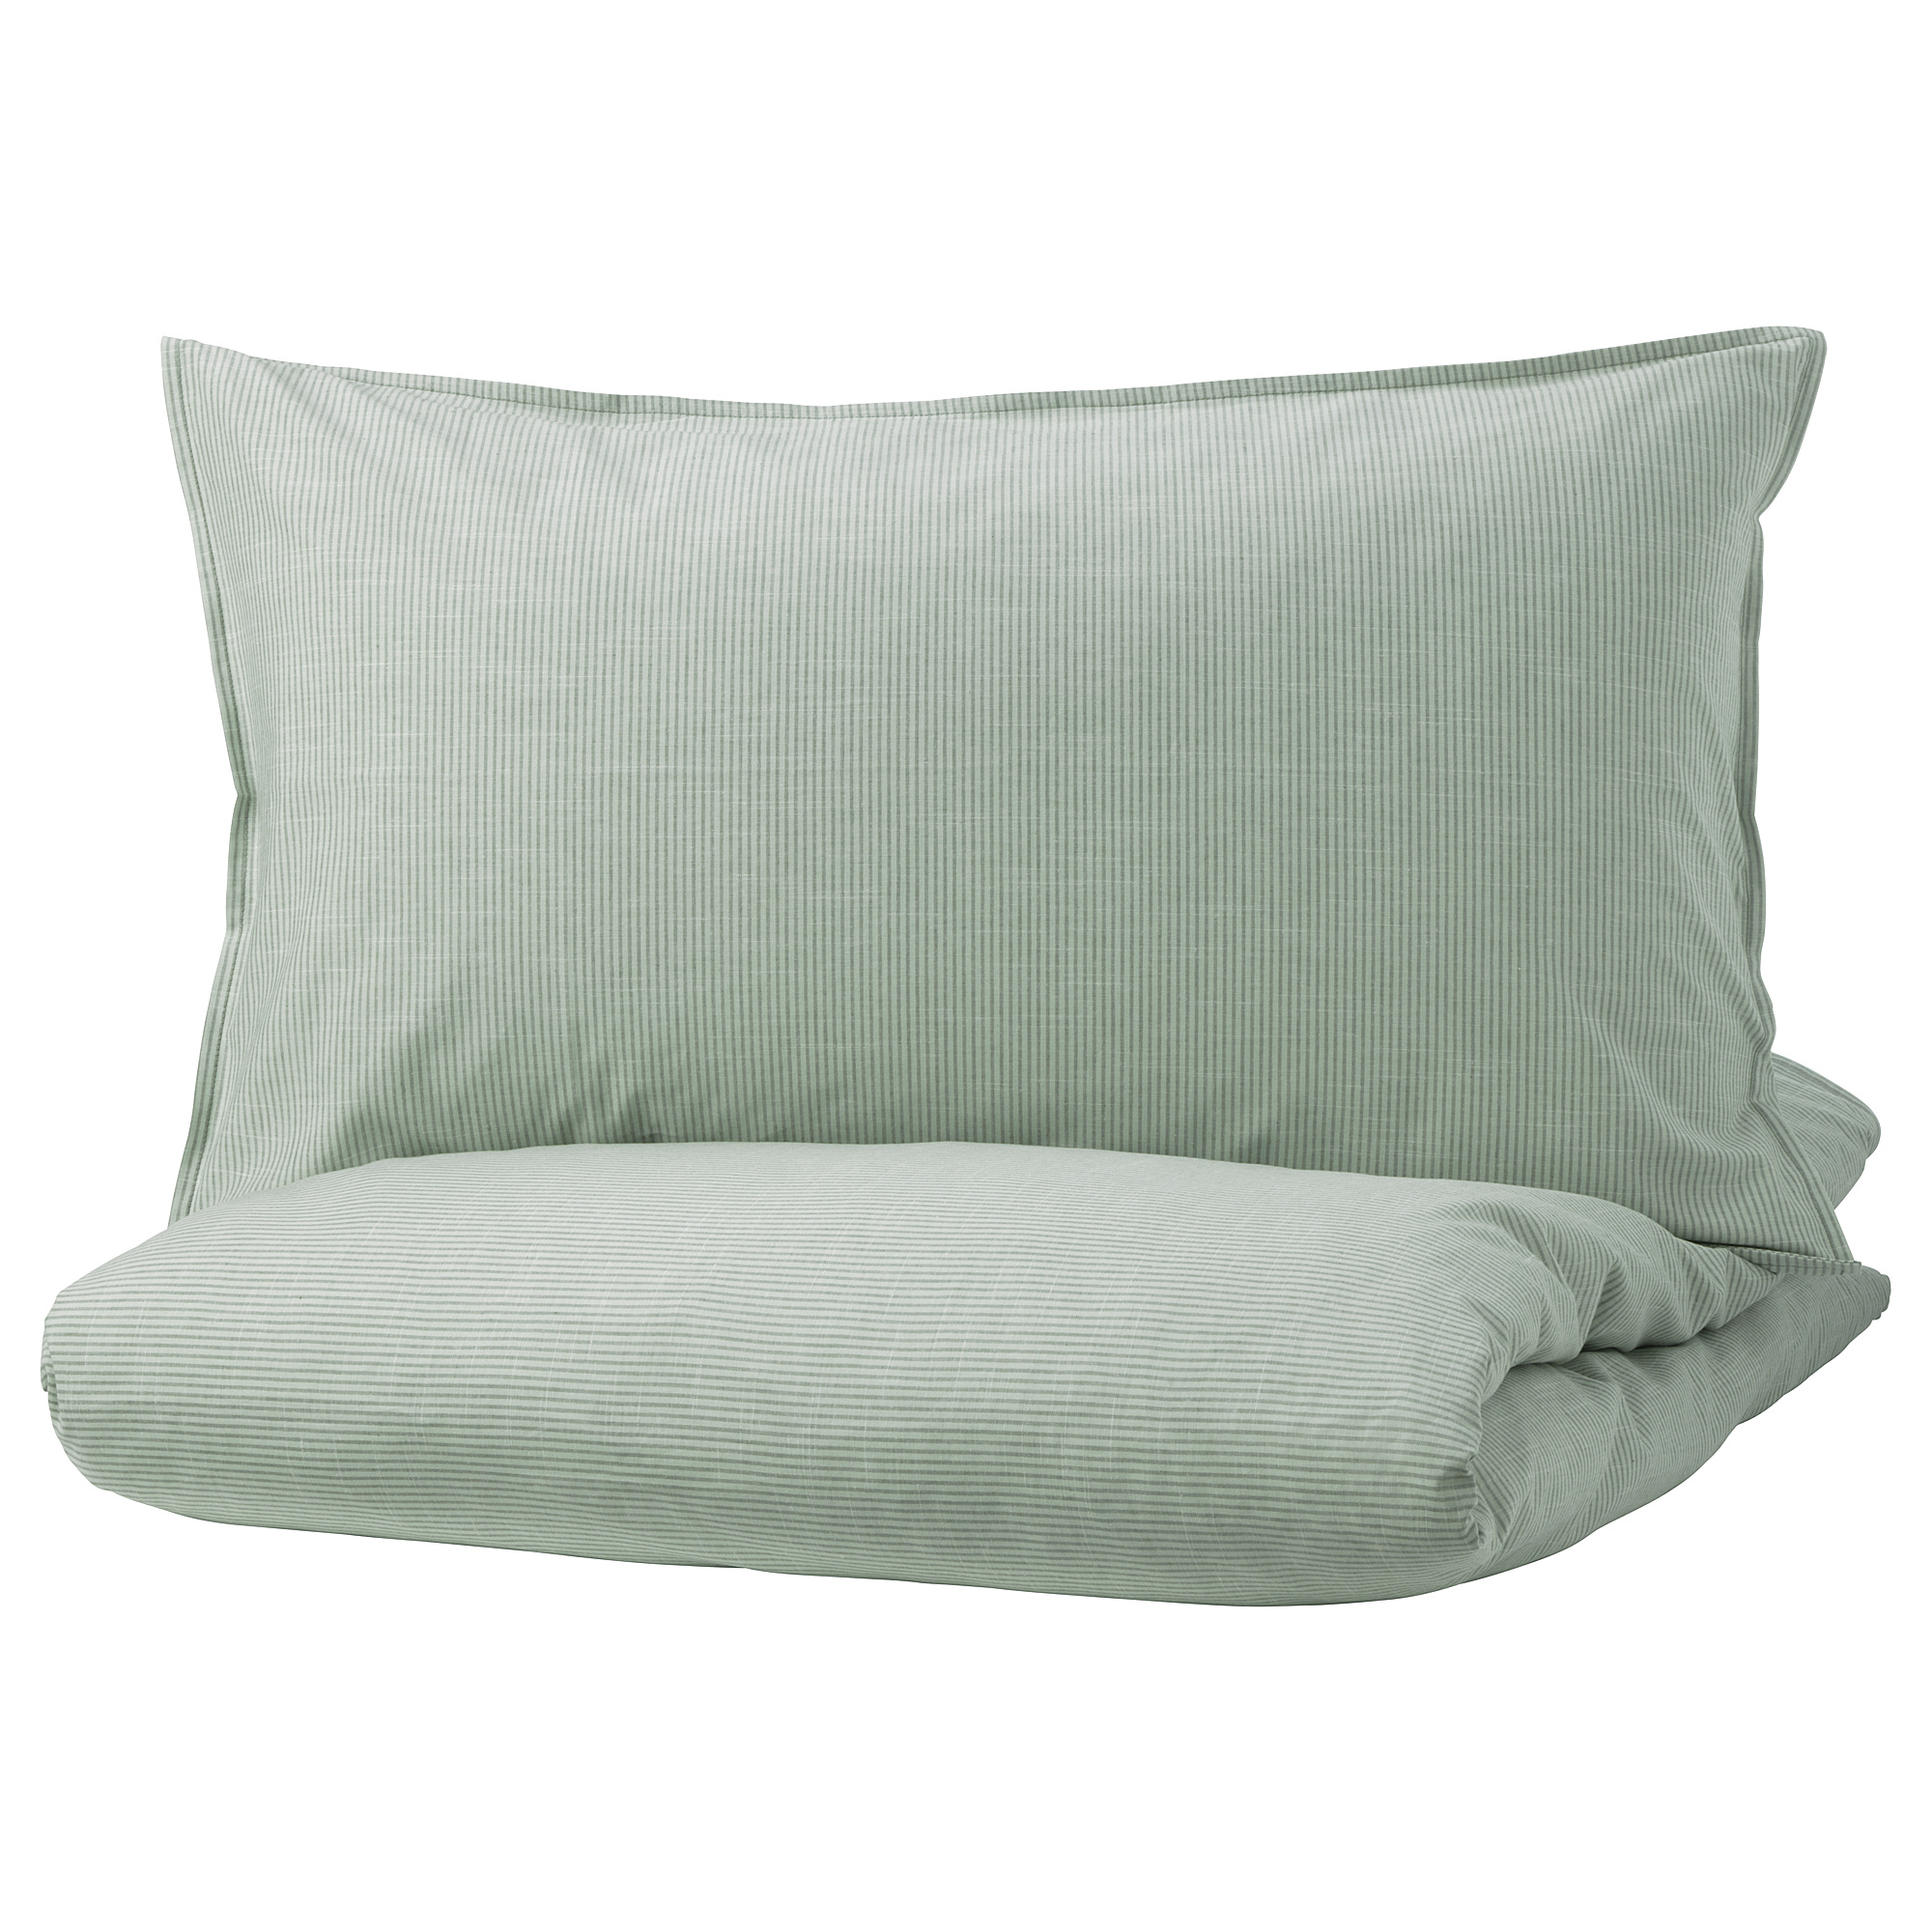 BERGPALM duvet cover and pillowcase